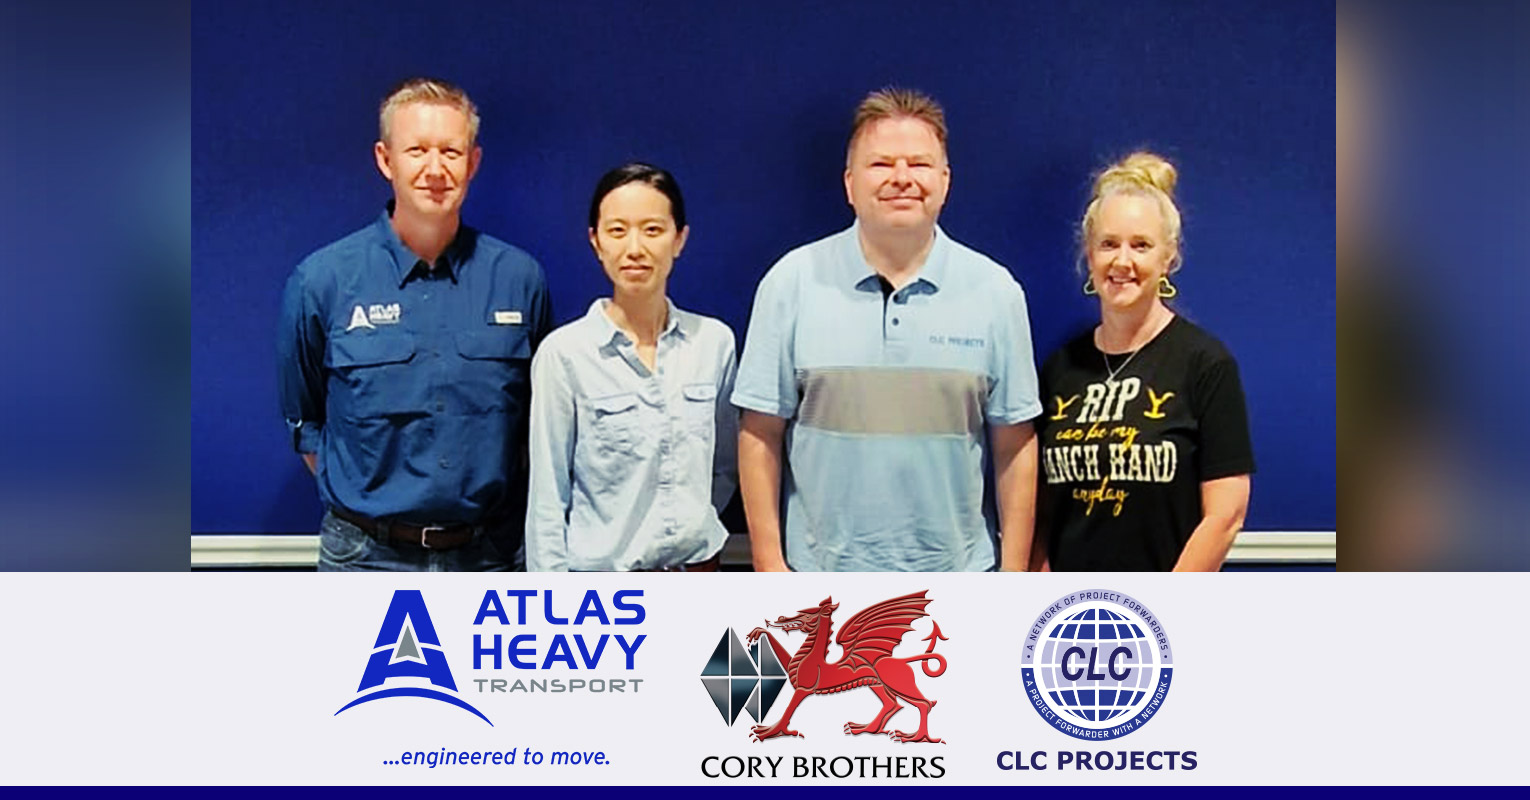 Service provider Atlas Heavy Transport and UK member Cory Brothers meeting with our Chairman in Houston. Pictured left to right are Anders Pedersen, Bo H. Drewsen, Vickie Luo and Lita Galloway